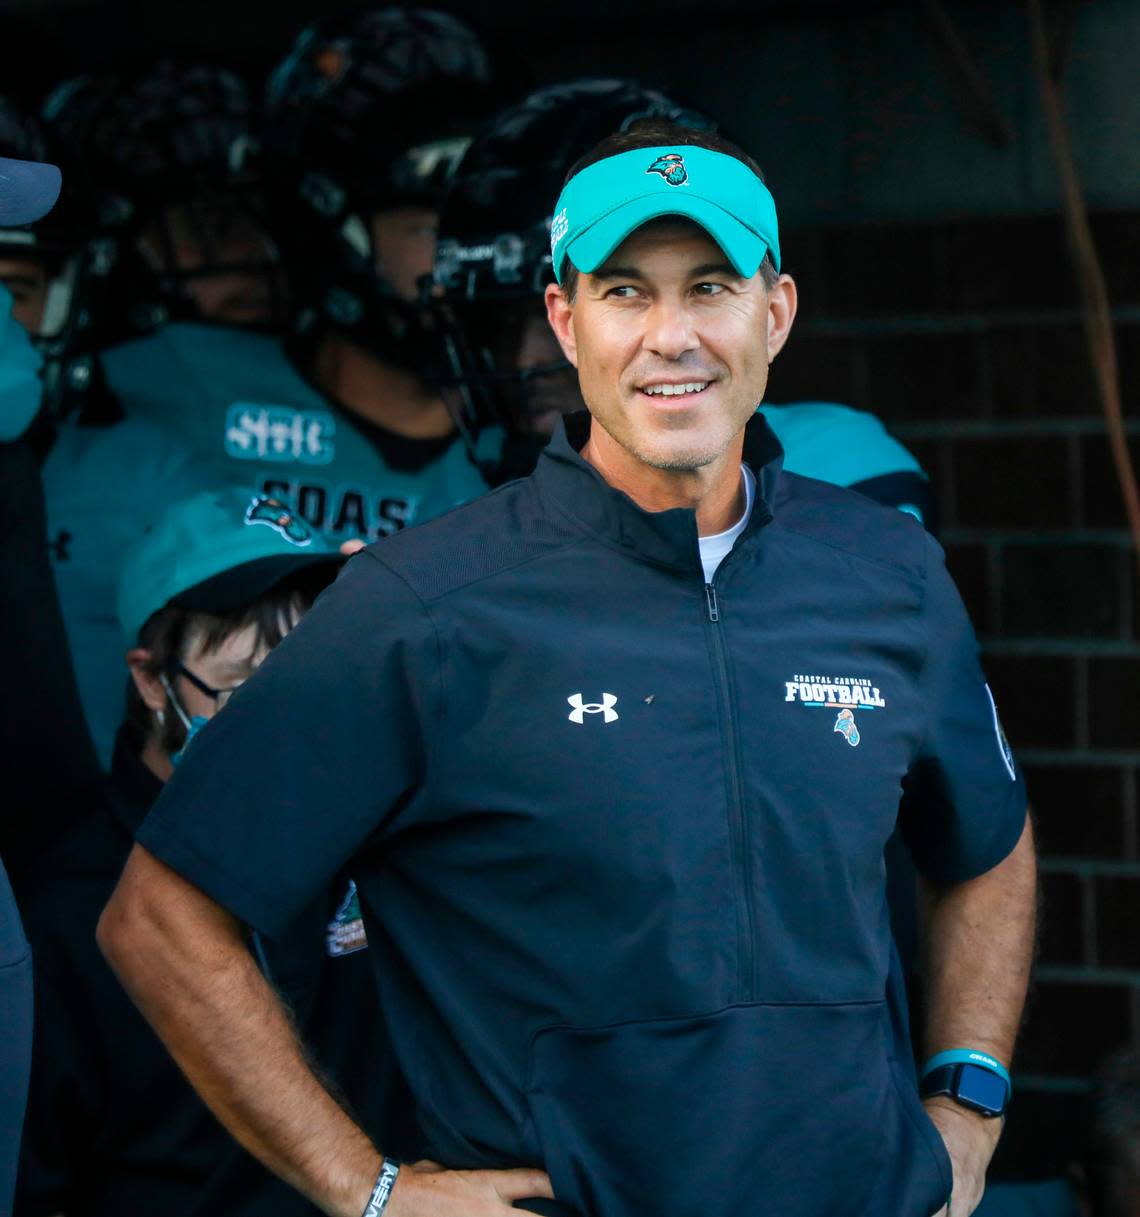 Coastal Coach Jamey Chadwell prepares to take his team on the field. Coastal Carolina University beat Army in the first game of the 2022 season at Brooks Stadium 38-28. A record crowd of 21,165 attended the game. Sept. 3, 2022.